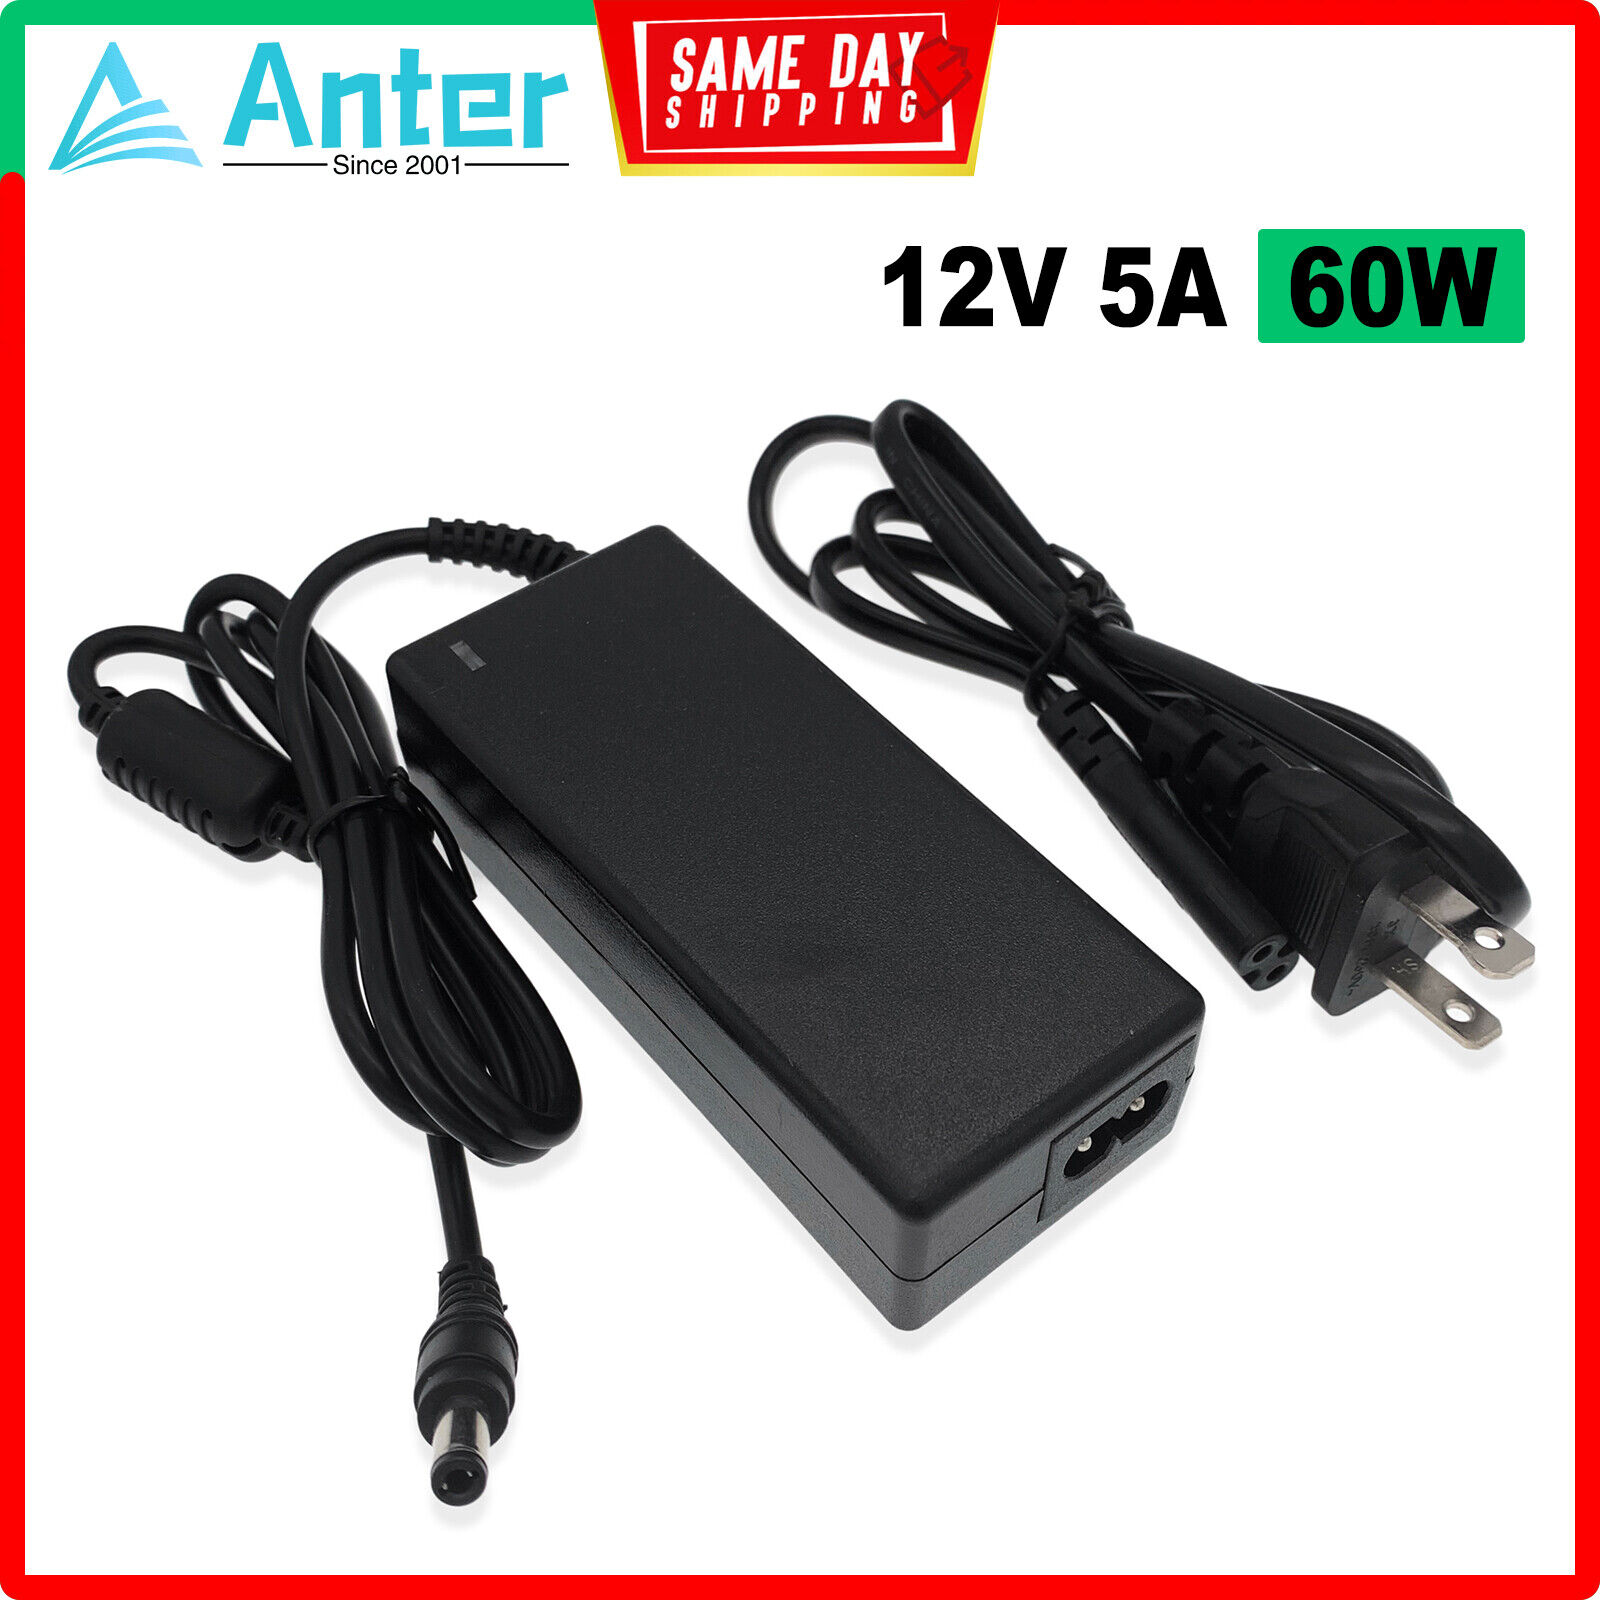 AC Adapter/Power Supply + Cord for Wearnes Global Co WDS050120 WDS060120 Monitor